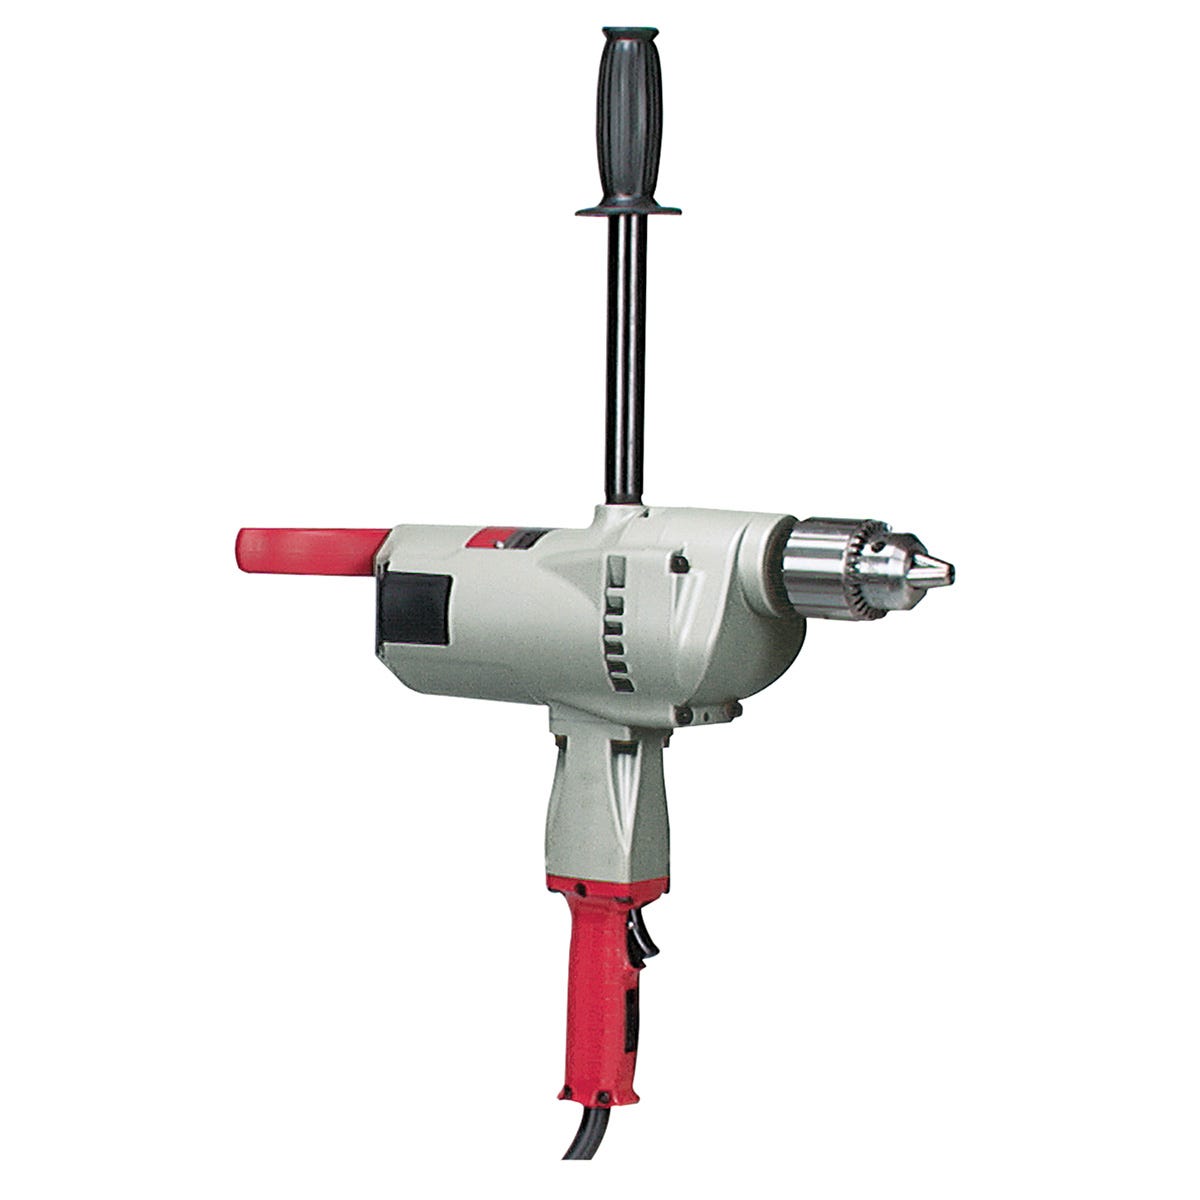 3/4" Large Drill, 350 RPM